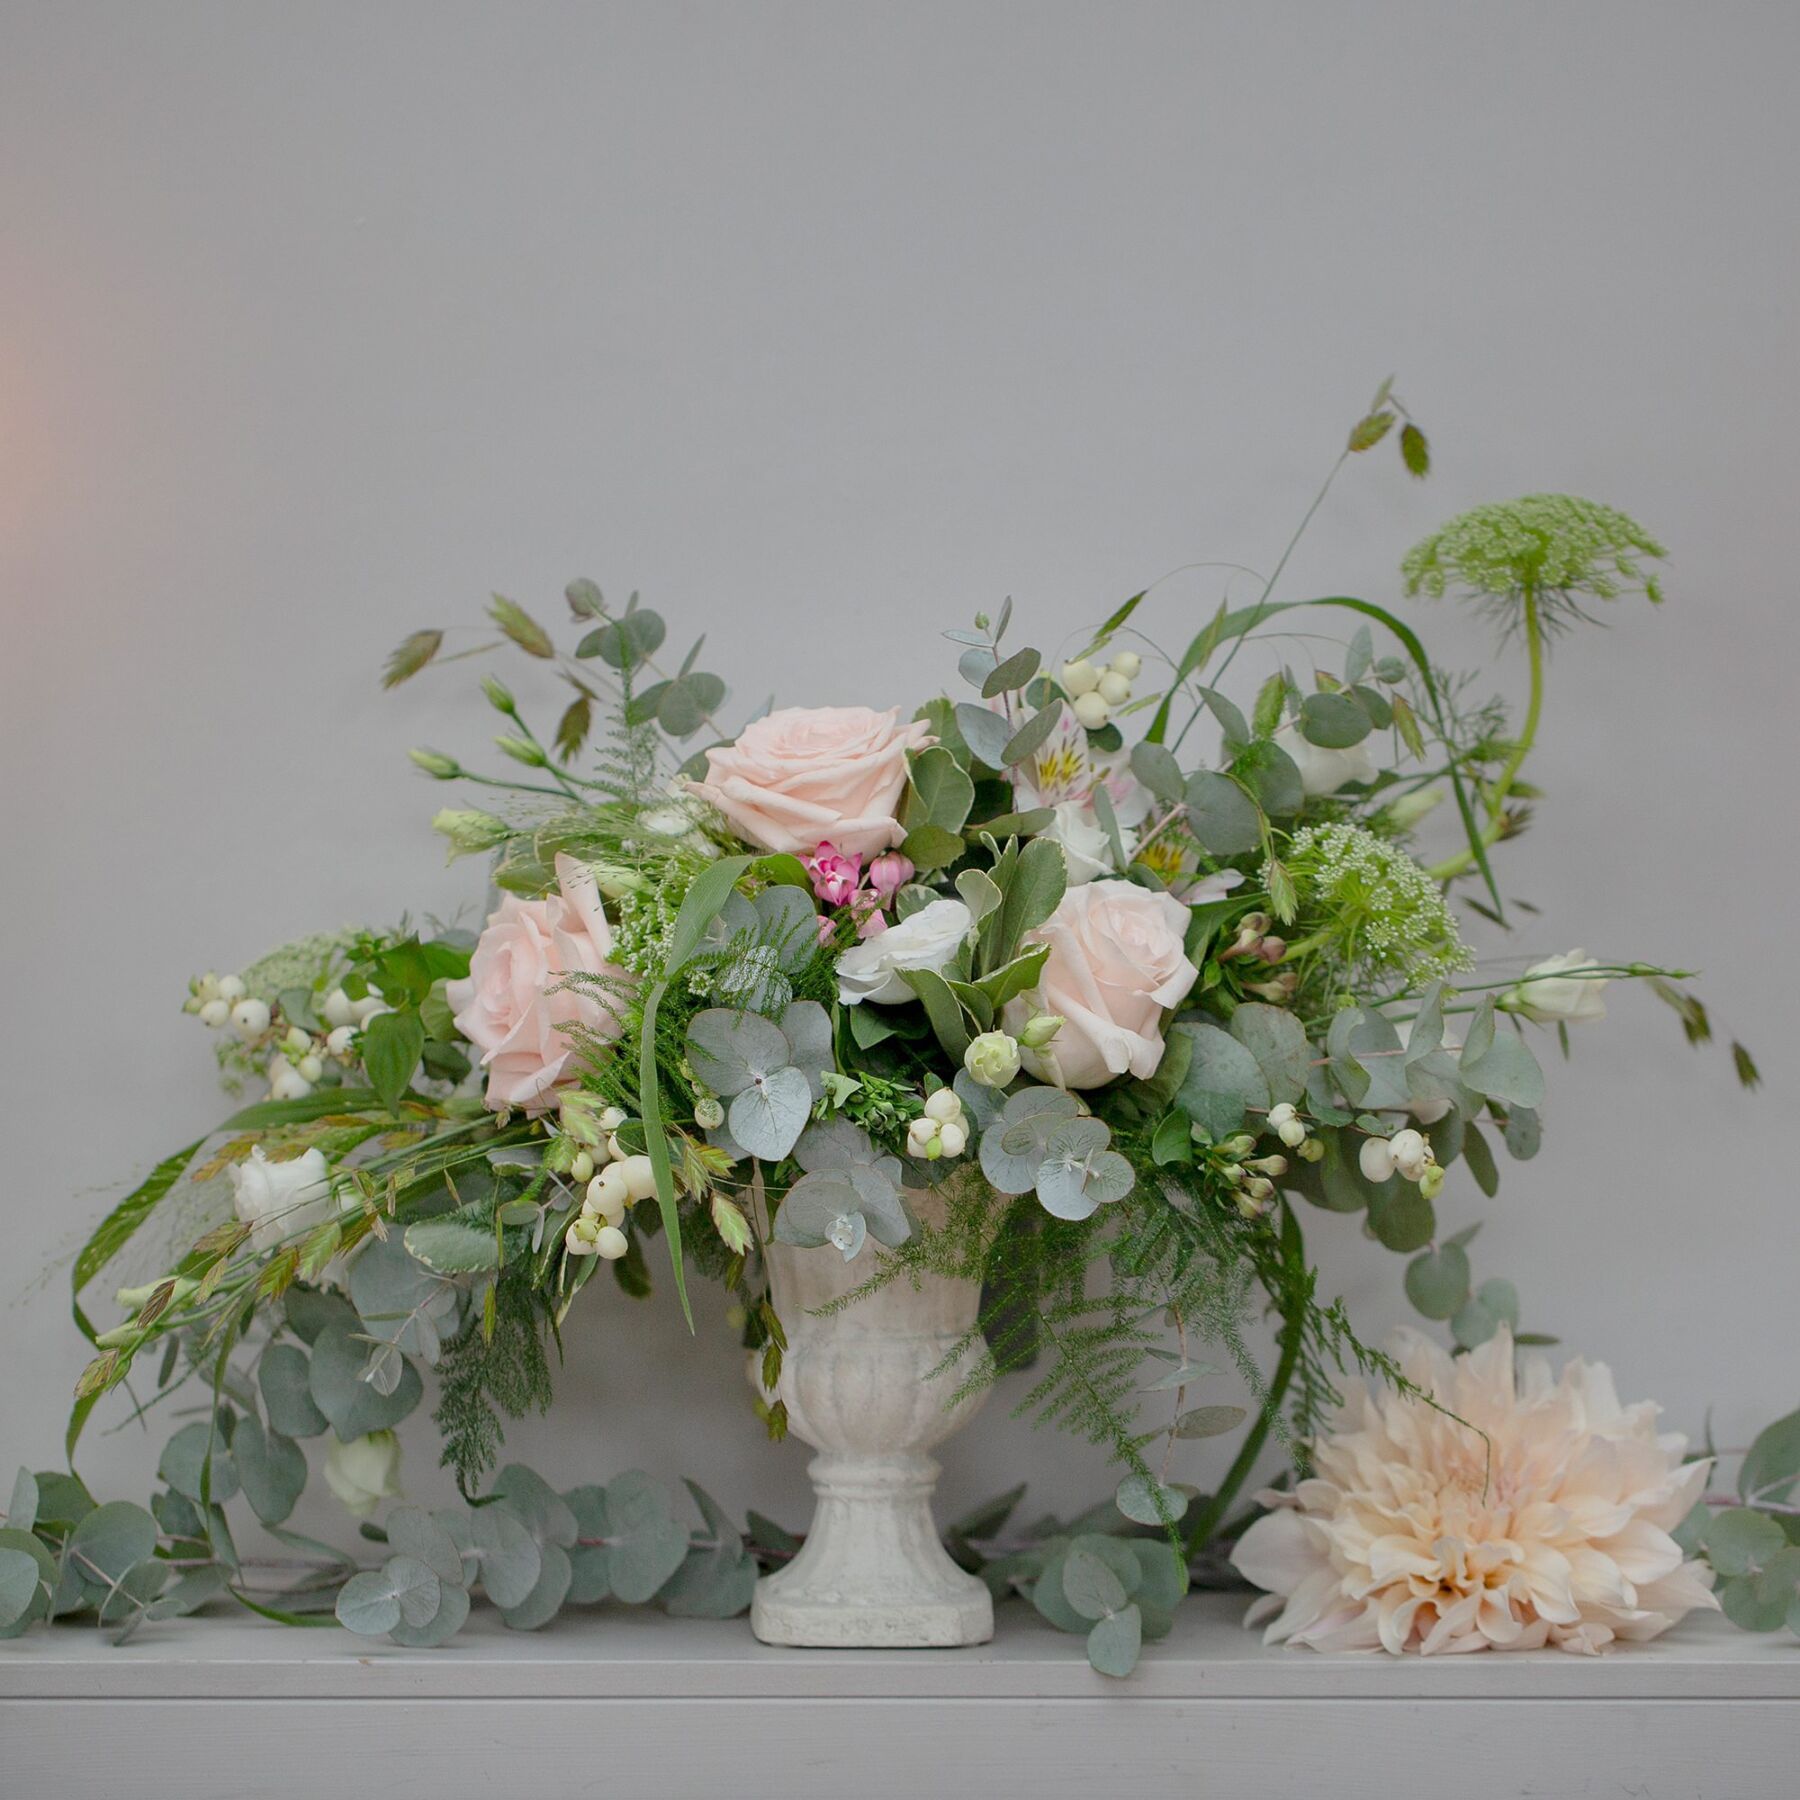 Eucalyptus Events, Cotswolds Wedding Planner. Elegant pale pink roses and eucalyptus wedding flowers.